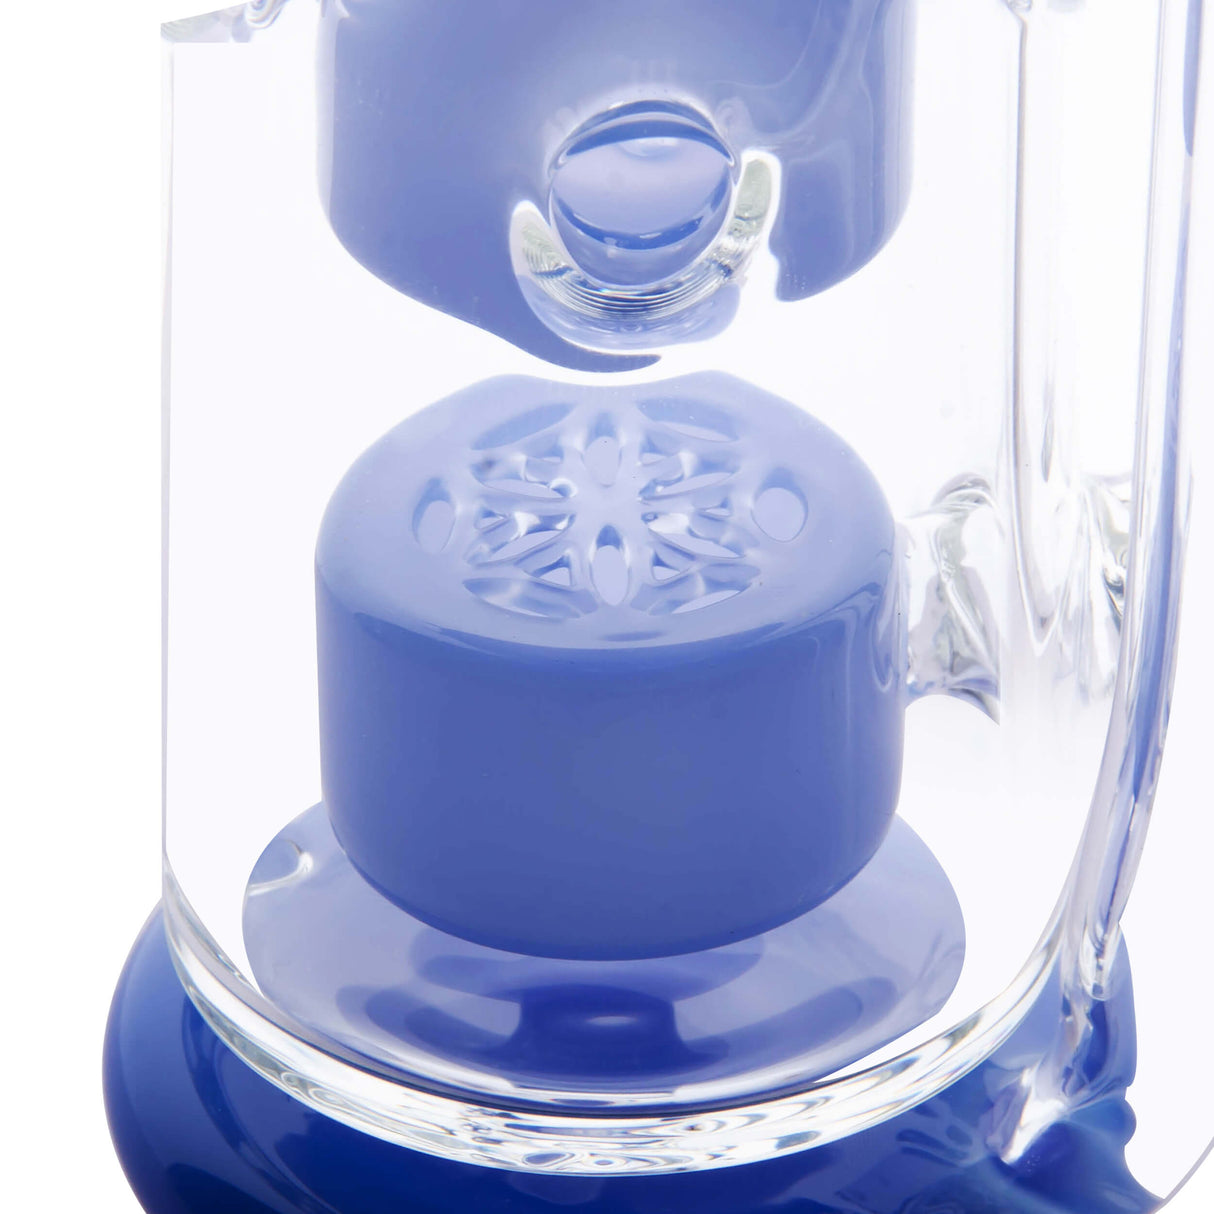 Calibear Straight Fab Puffco Attachment in blue, close-up side view, for e-rig vaporizers